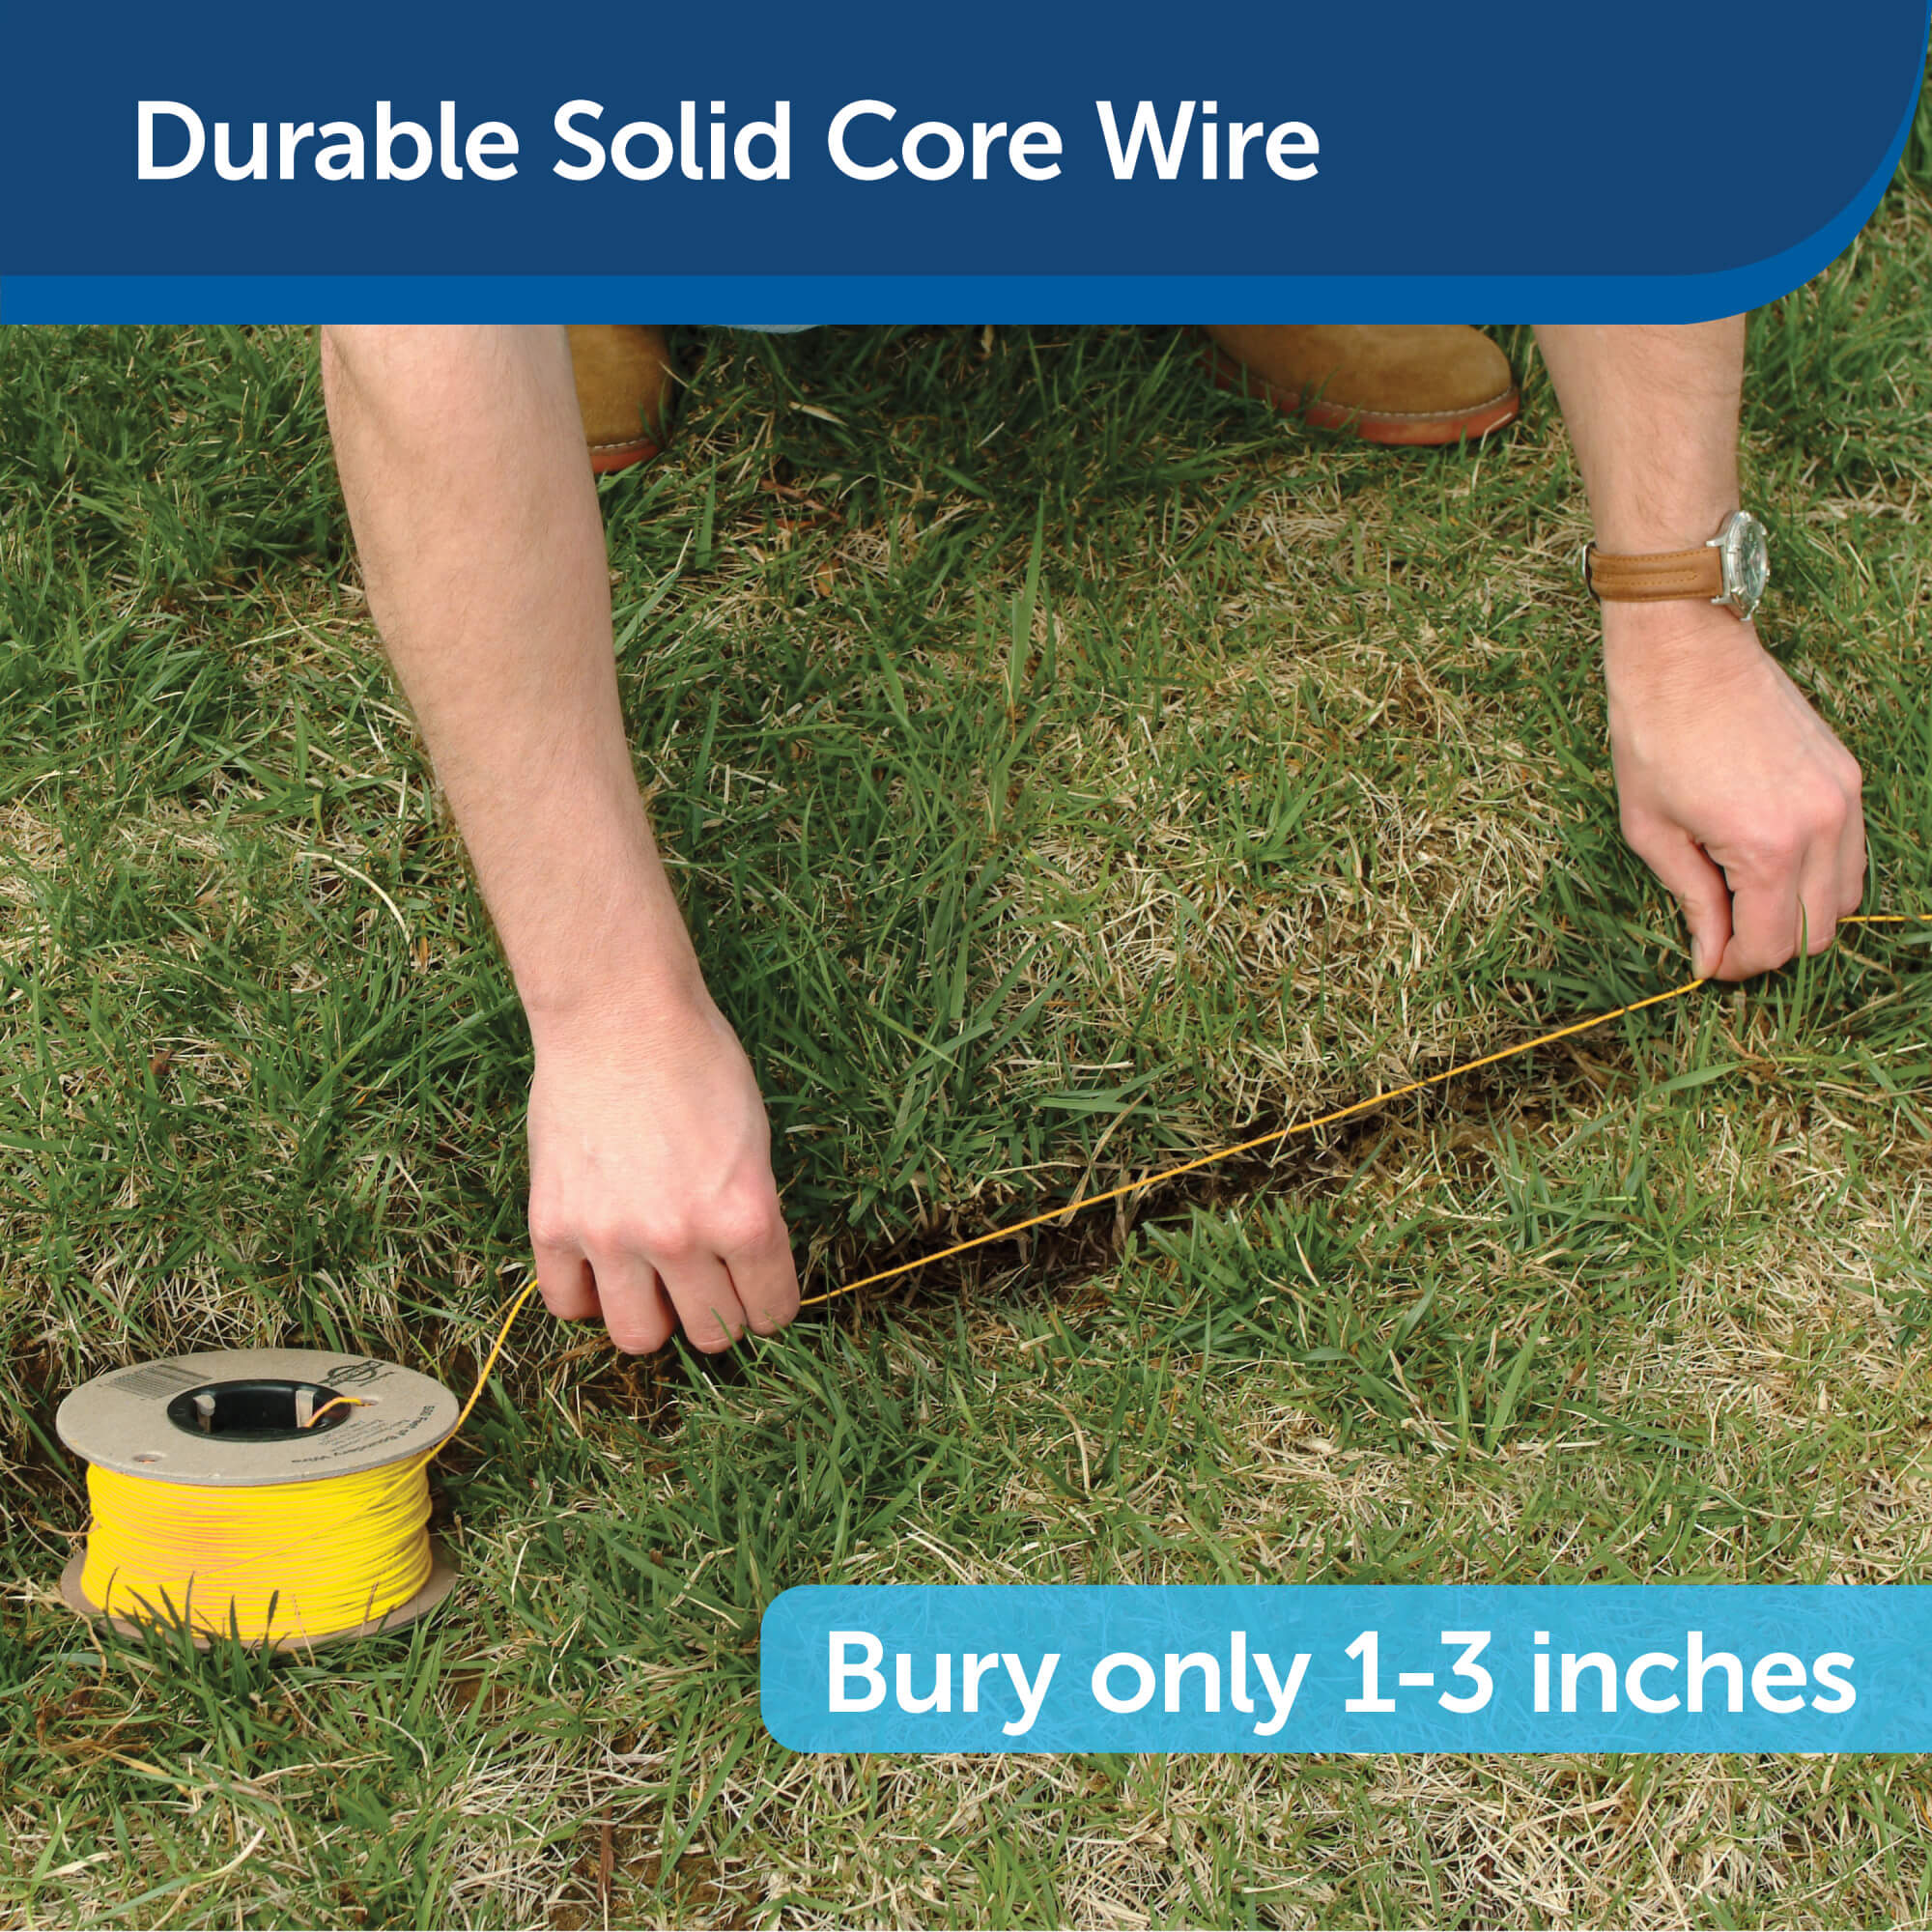 PetSafe Durable solid core wire